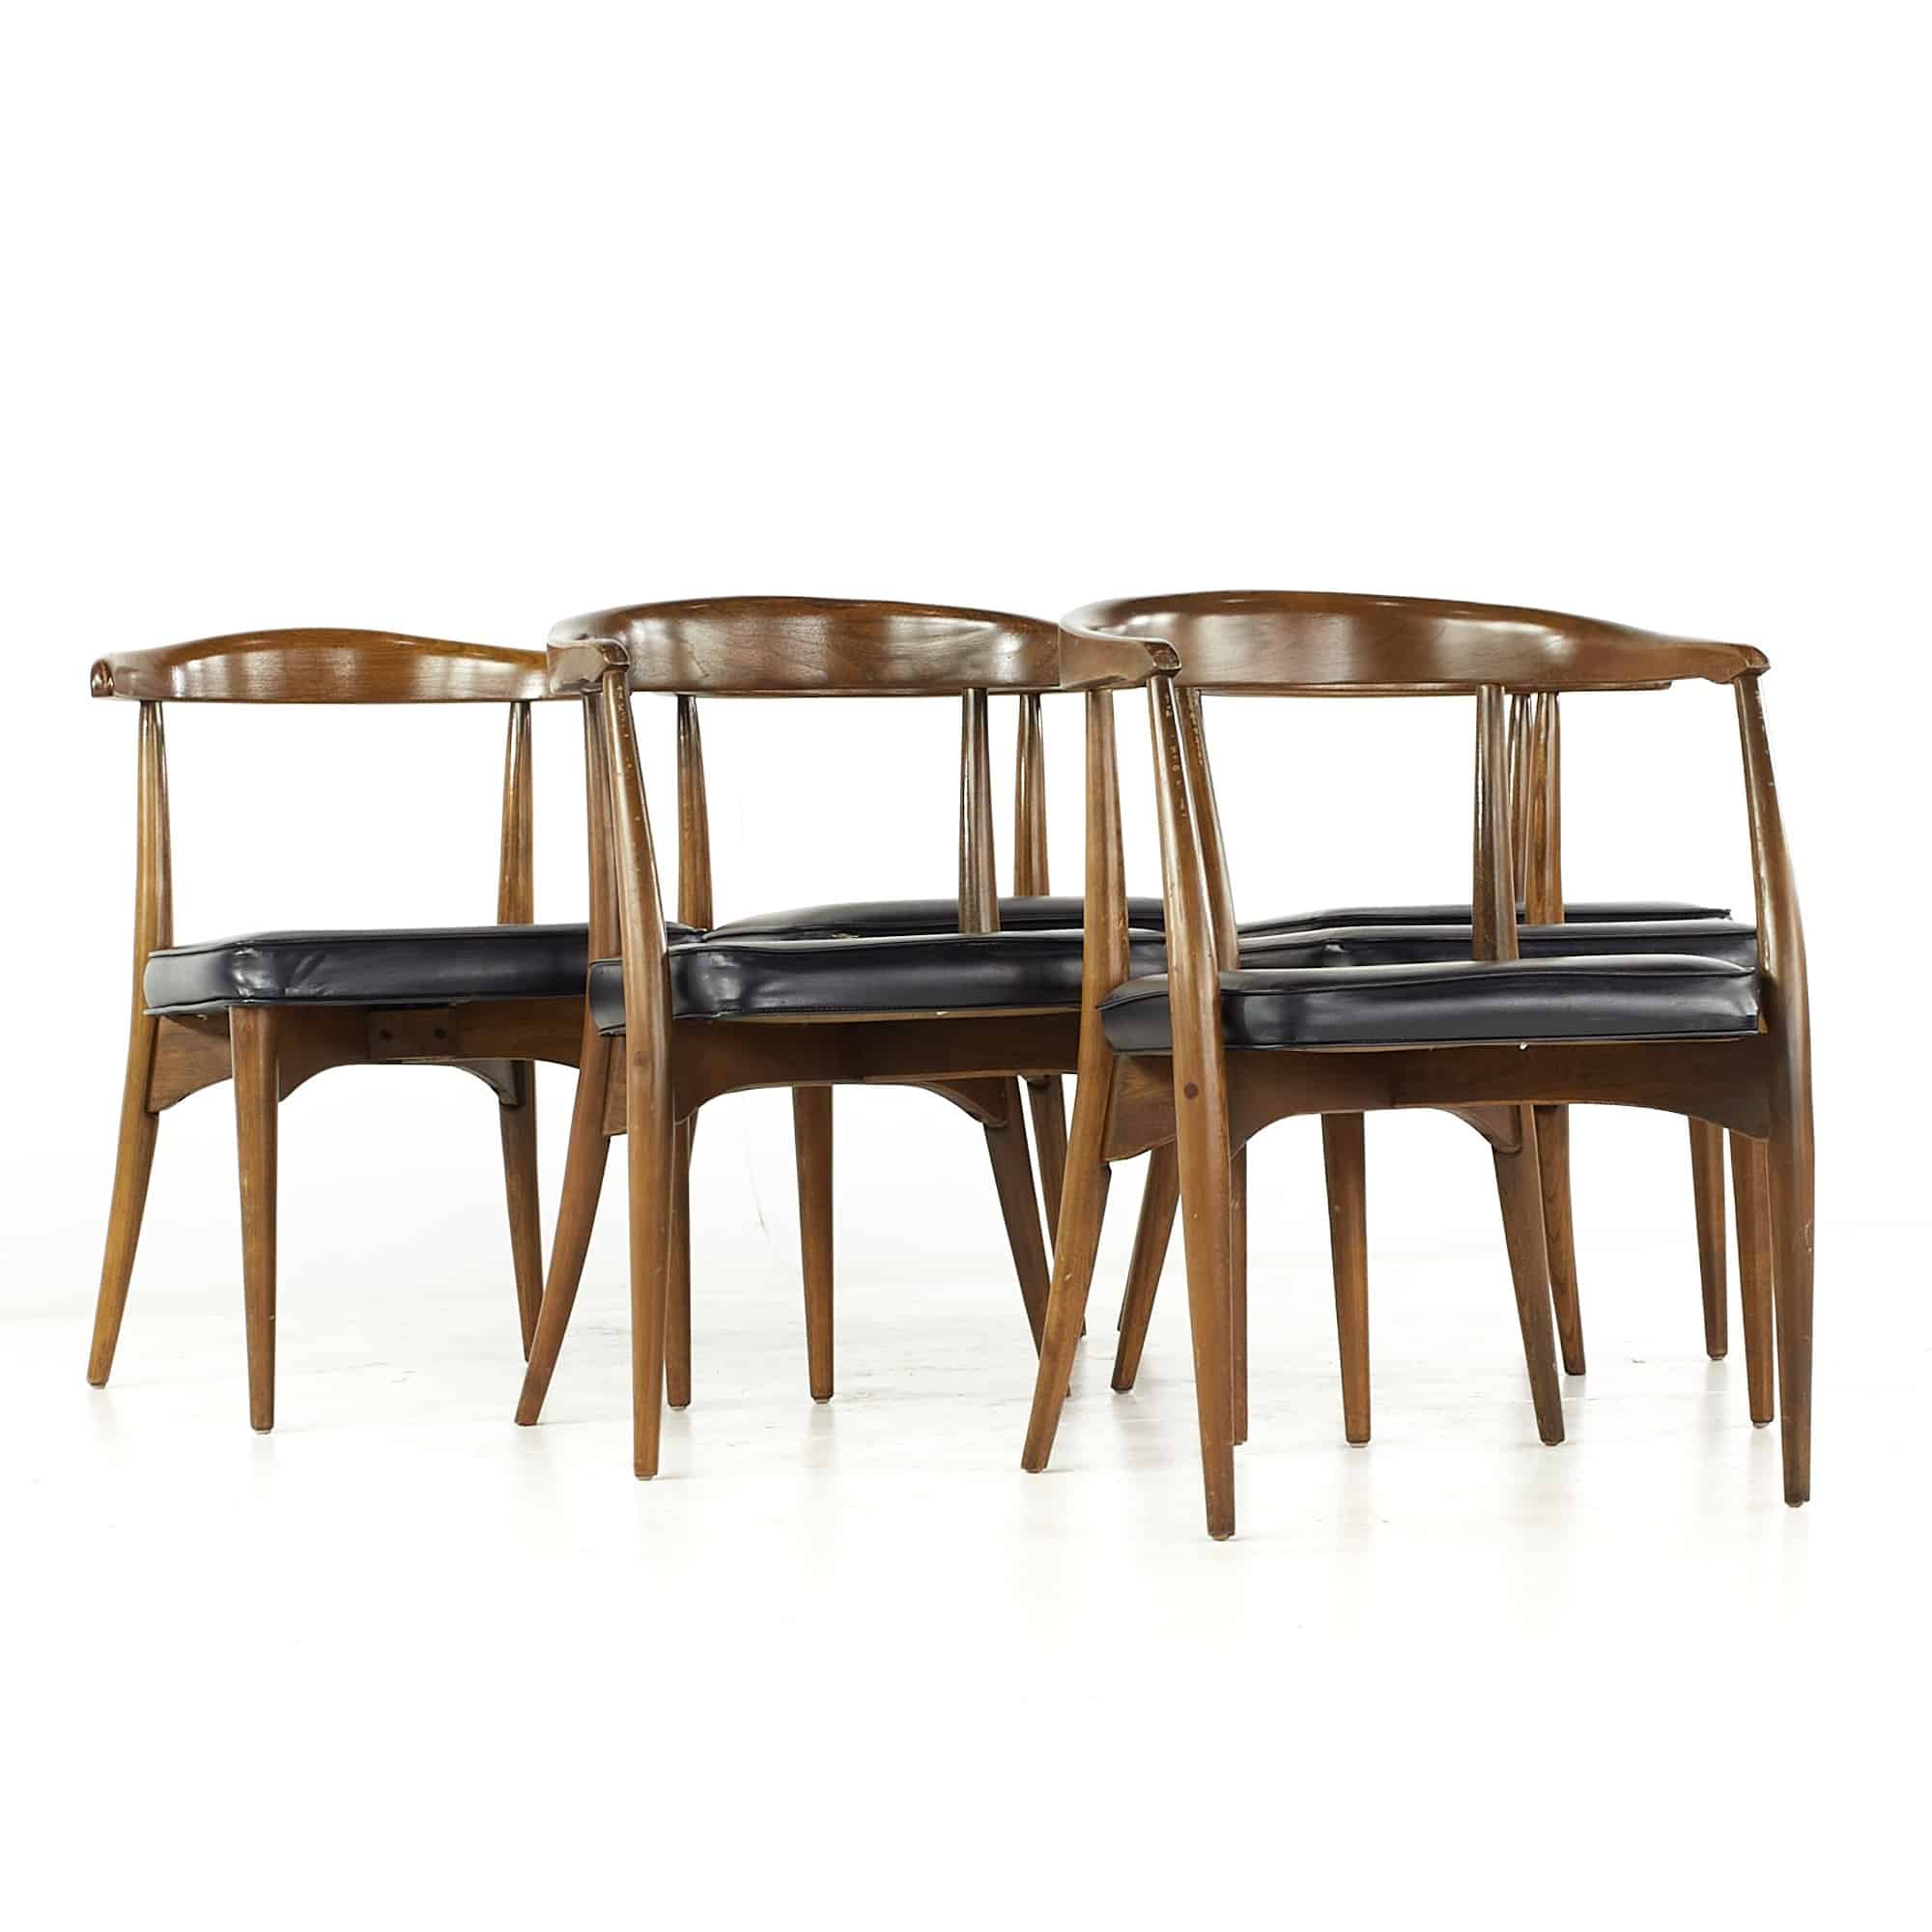 Lawrence Peabody Mid Century Walnut Dining Chairs - Set of 6